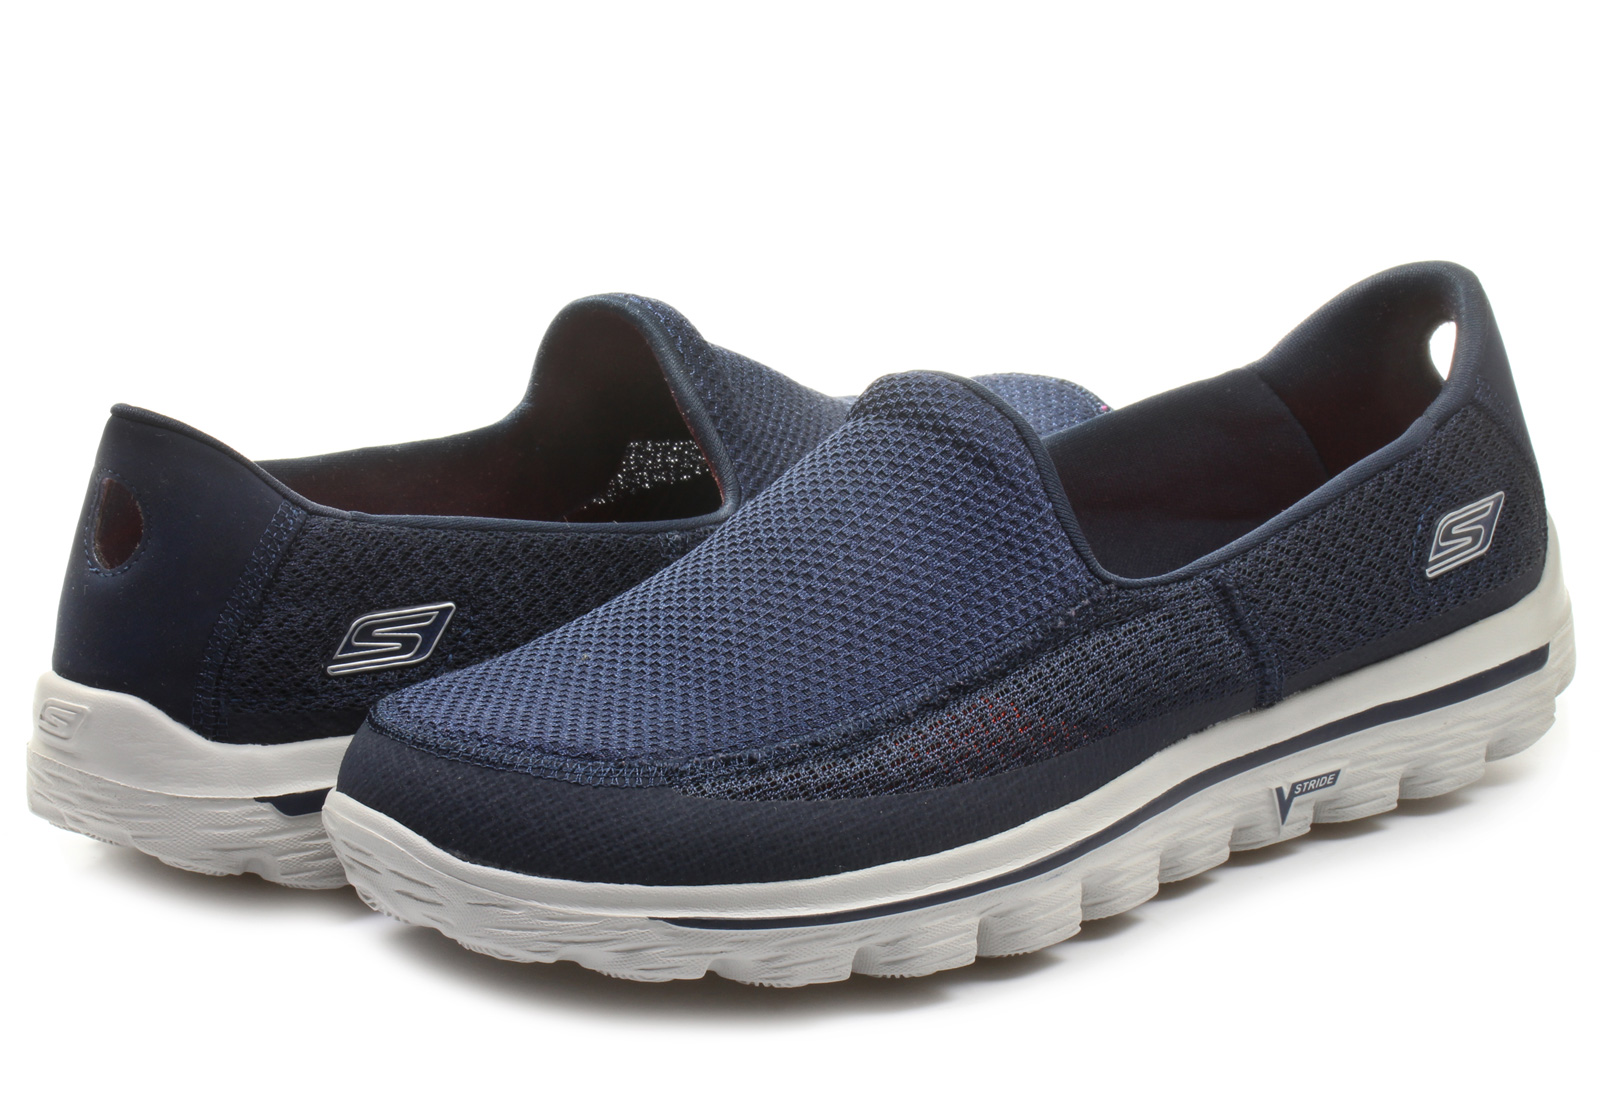 Skechers Shoes - Go Walk 2 - 53590-nvgy - Online shop for sneakers ...